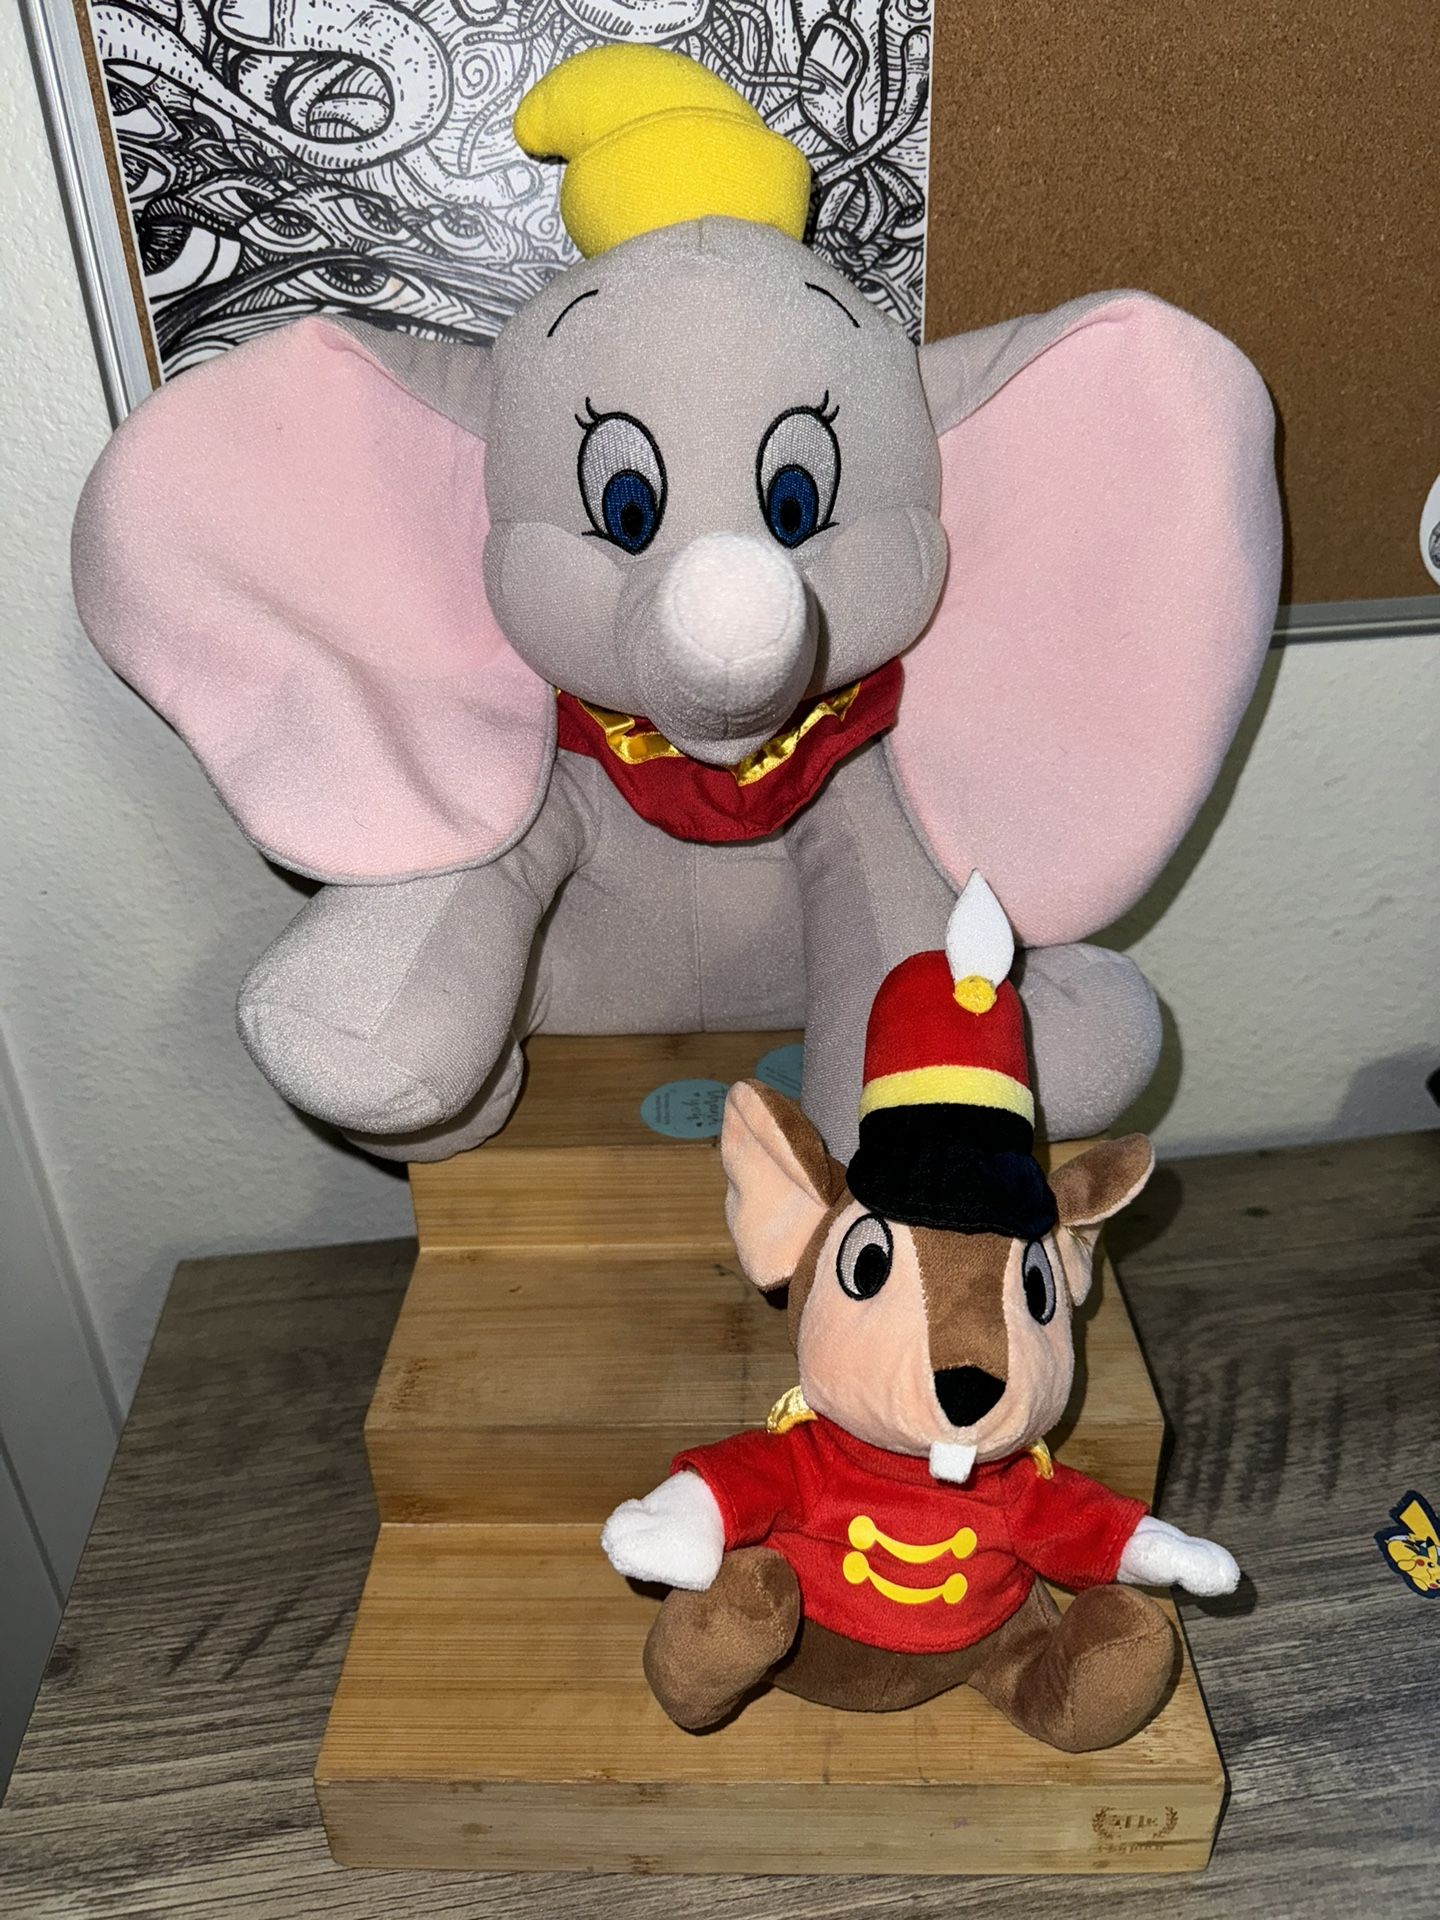 DUMBO And TIMOTHY DISNEY PARKS Plush Toy Stuffed Animals Authentic